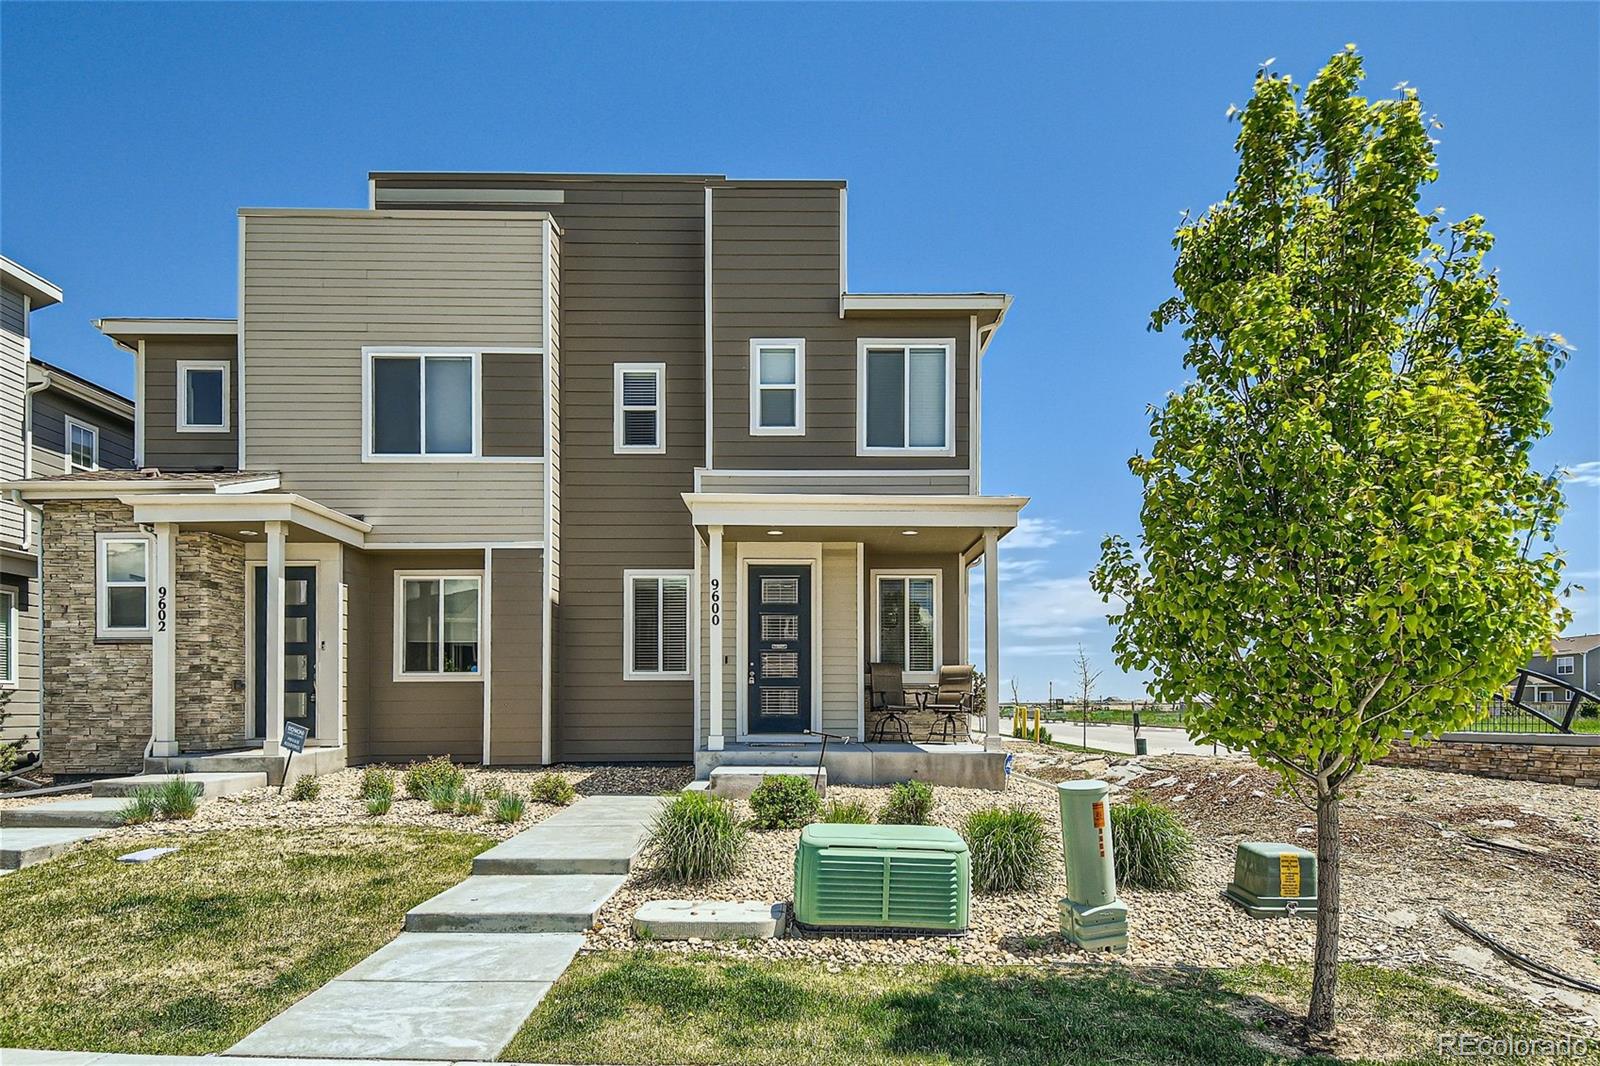 View Commerce City, CO 80022 townhome